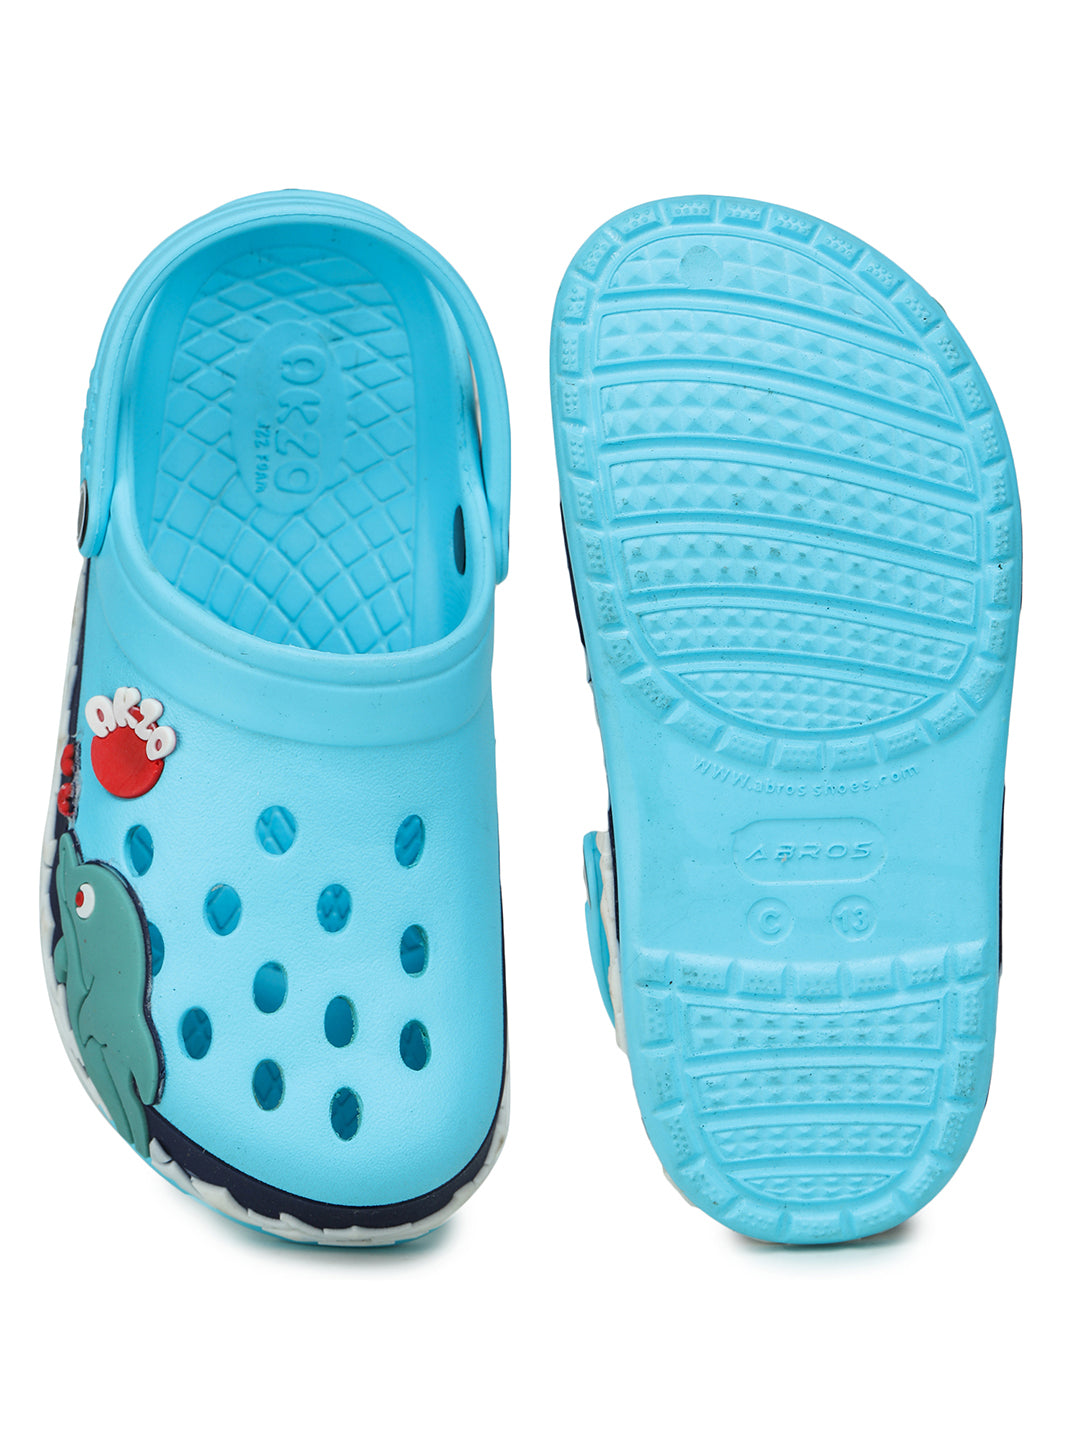 ABROS ZCK-0805 CLOGS FOR KIDS